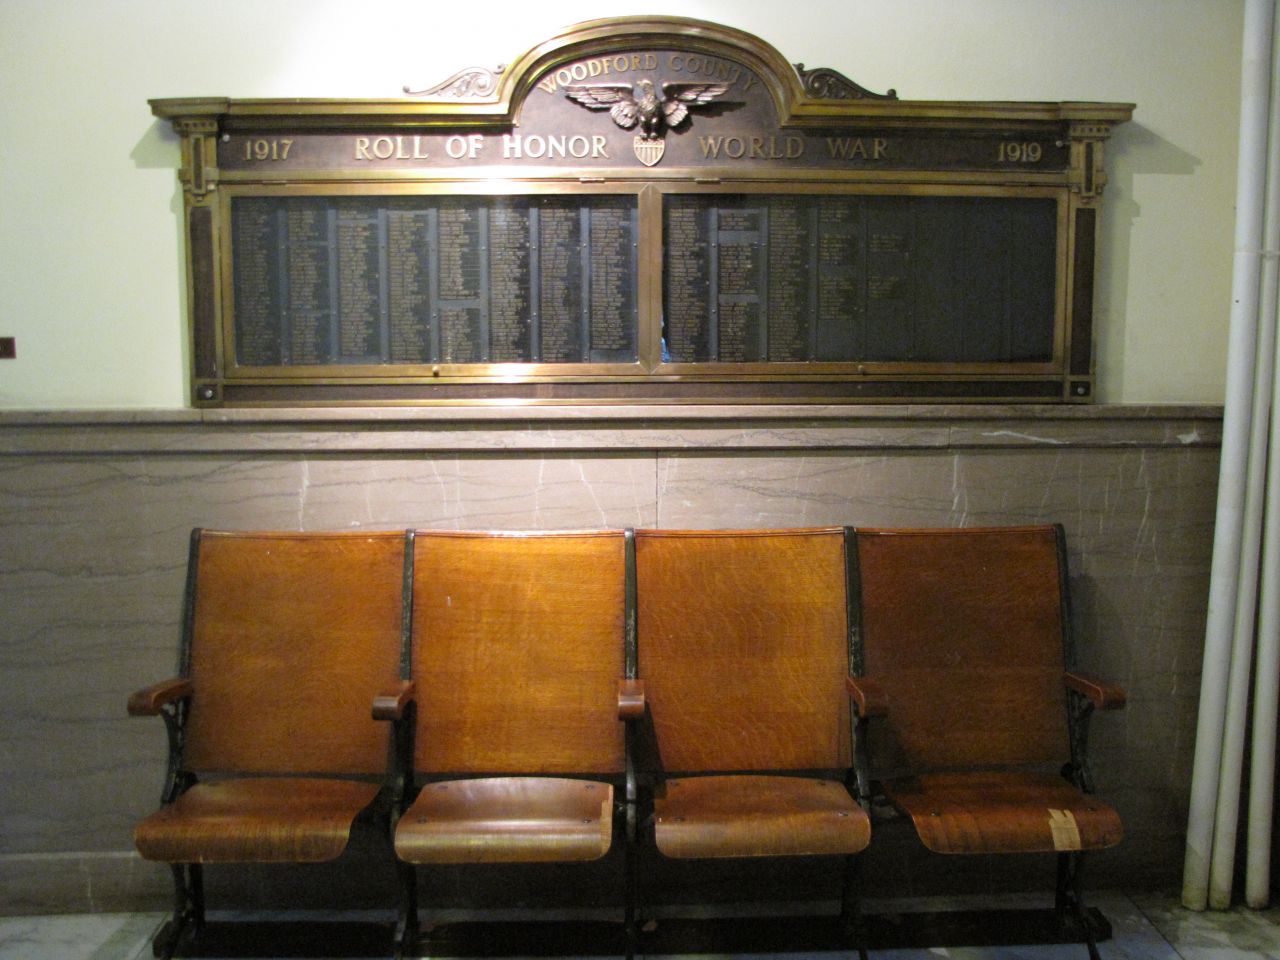 World War II memorial and antique benched on first floor